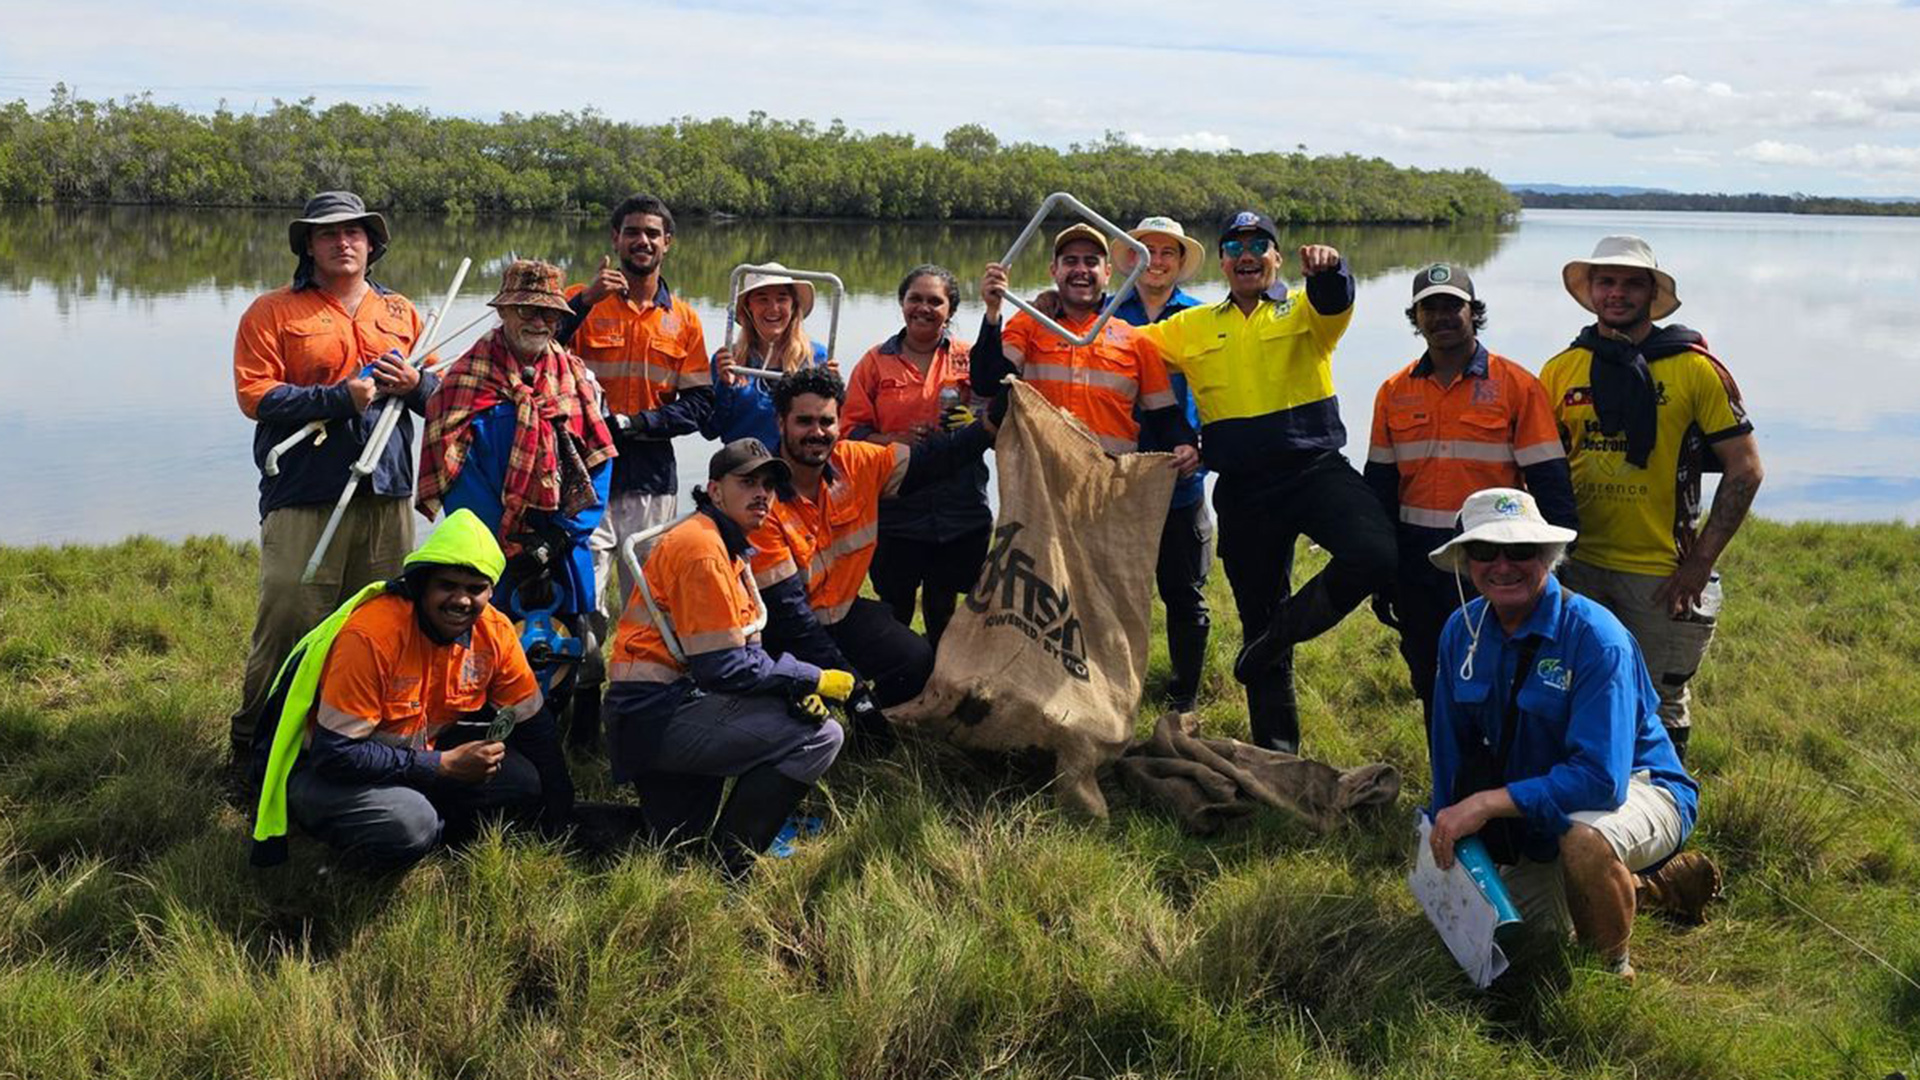 A group of people in high vis gear posing for the camera in front of a wetland